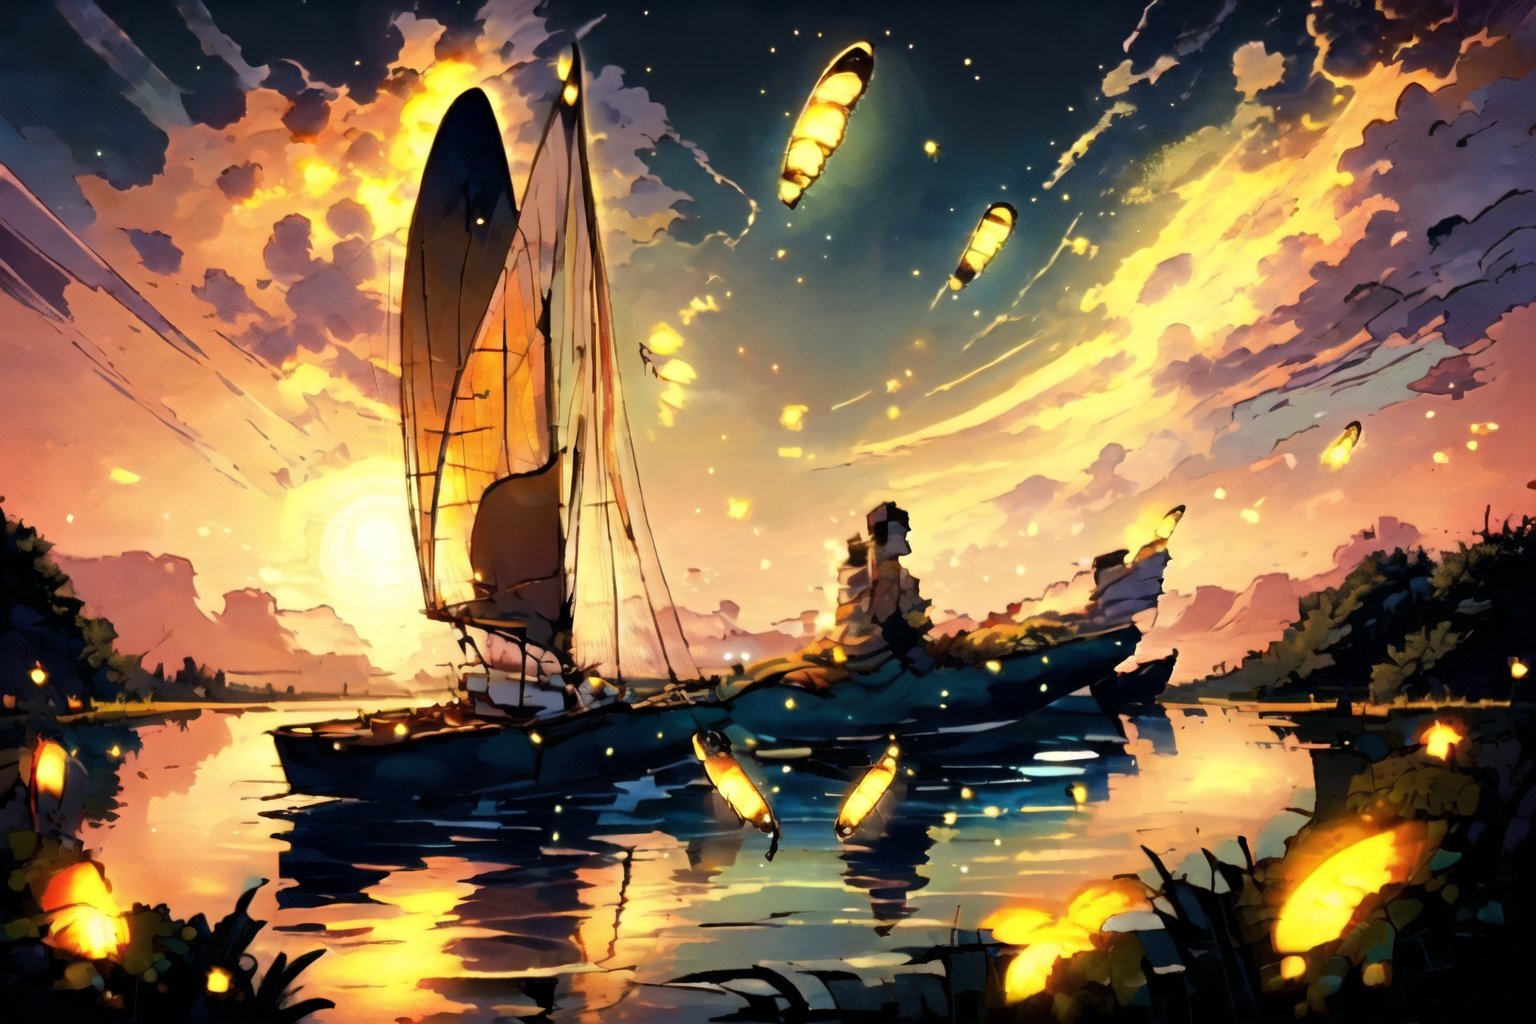 	A 12X16 inch cartoon style masterpiece; Capture the serenity of the kayaker gliding through the mirror-like lake, bathed in the warm glow of the setting sun.,firefliesfireflies,EpicArt